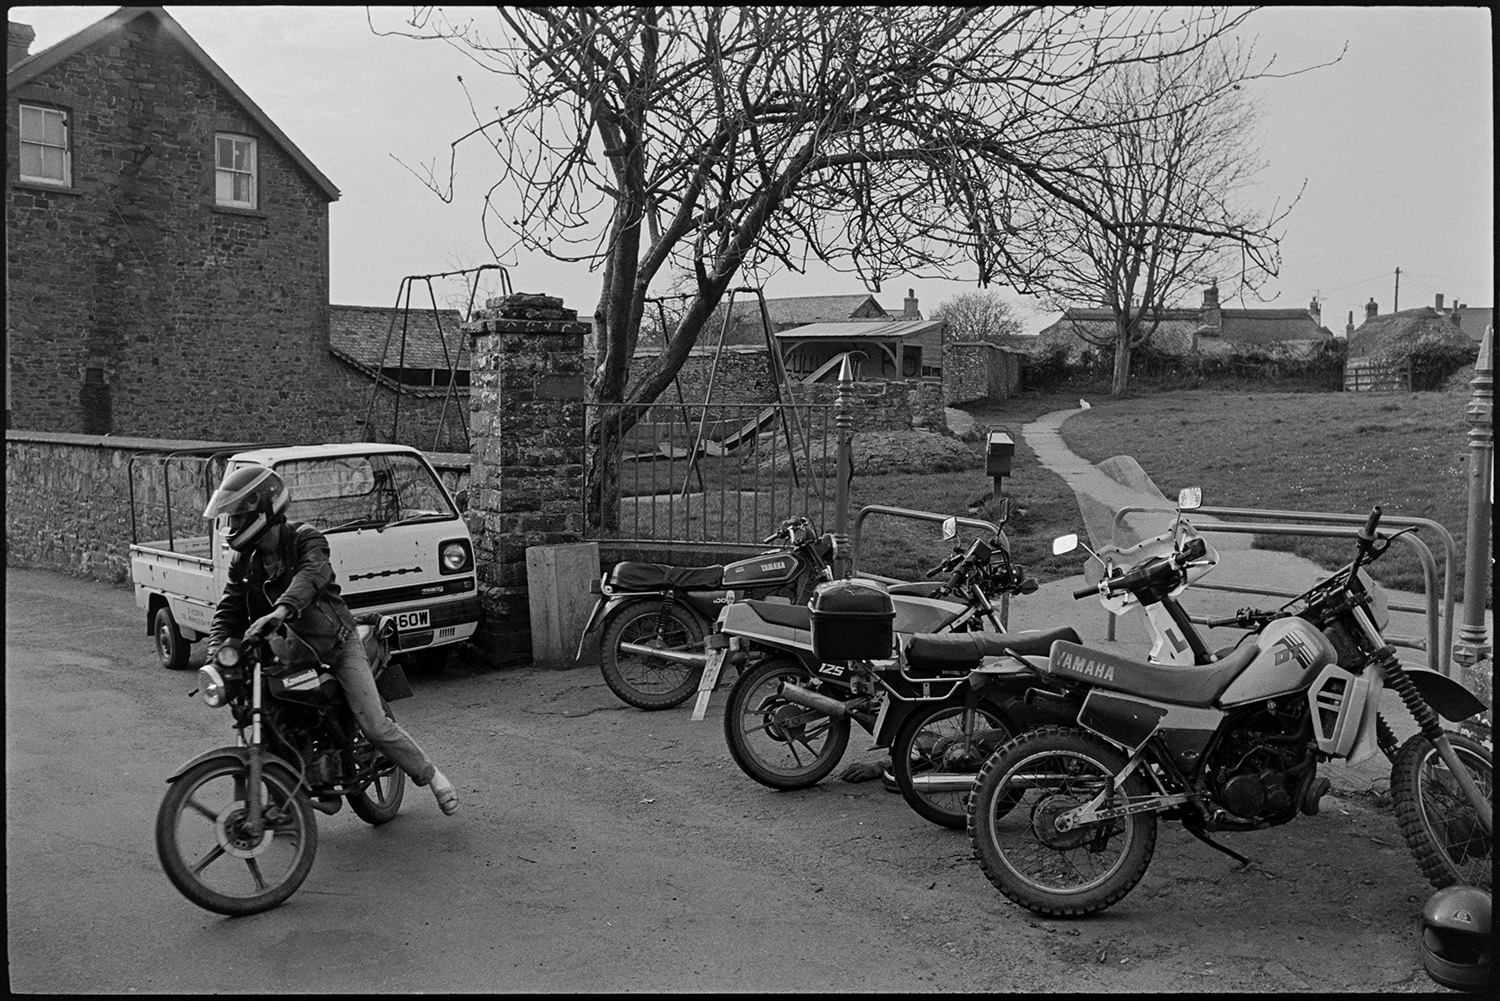 Street scenes with motorbikes.
[Street scene with motorbikes parked at the entrance to the park in Chulmleigh. Swings and a slide can be seen in the park. A person is riding off on a motorbike in the foreground. ]